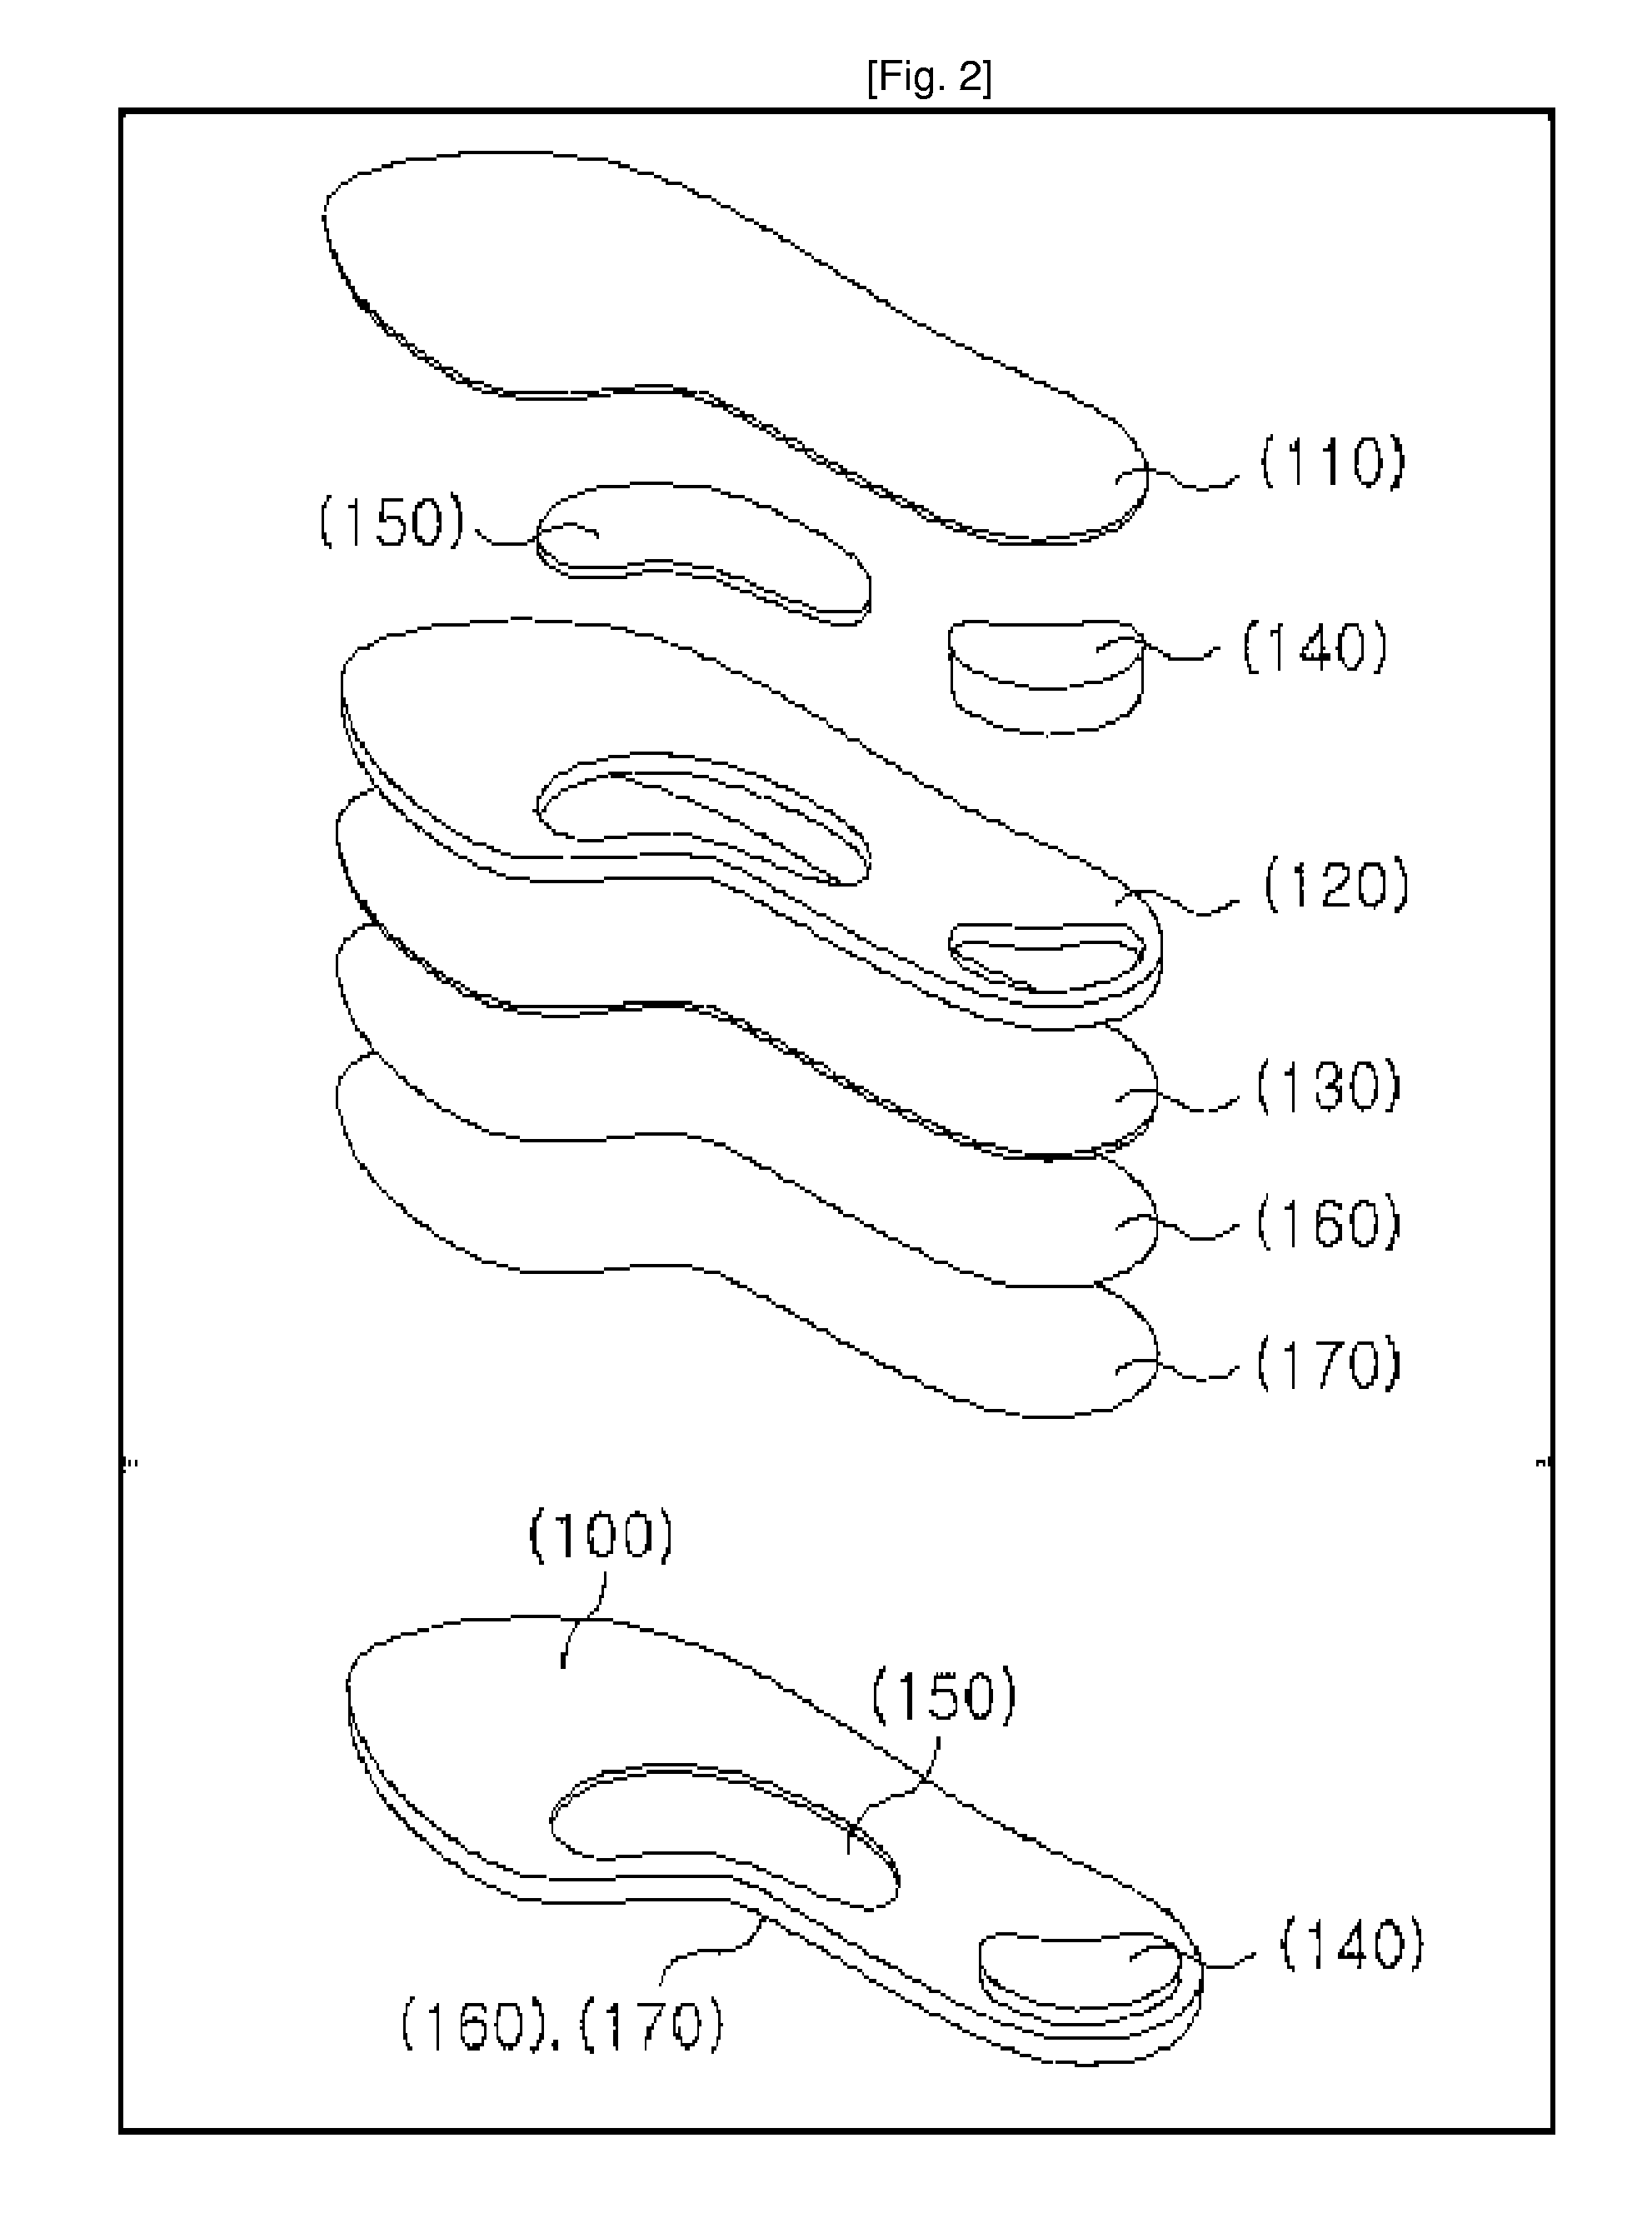 Method and Apparatus for Curing Body Status